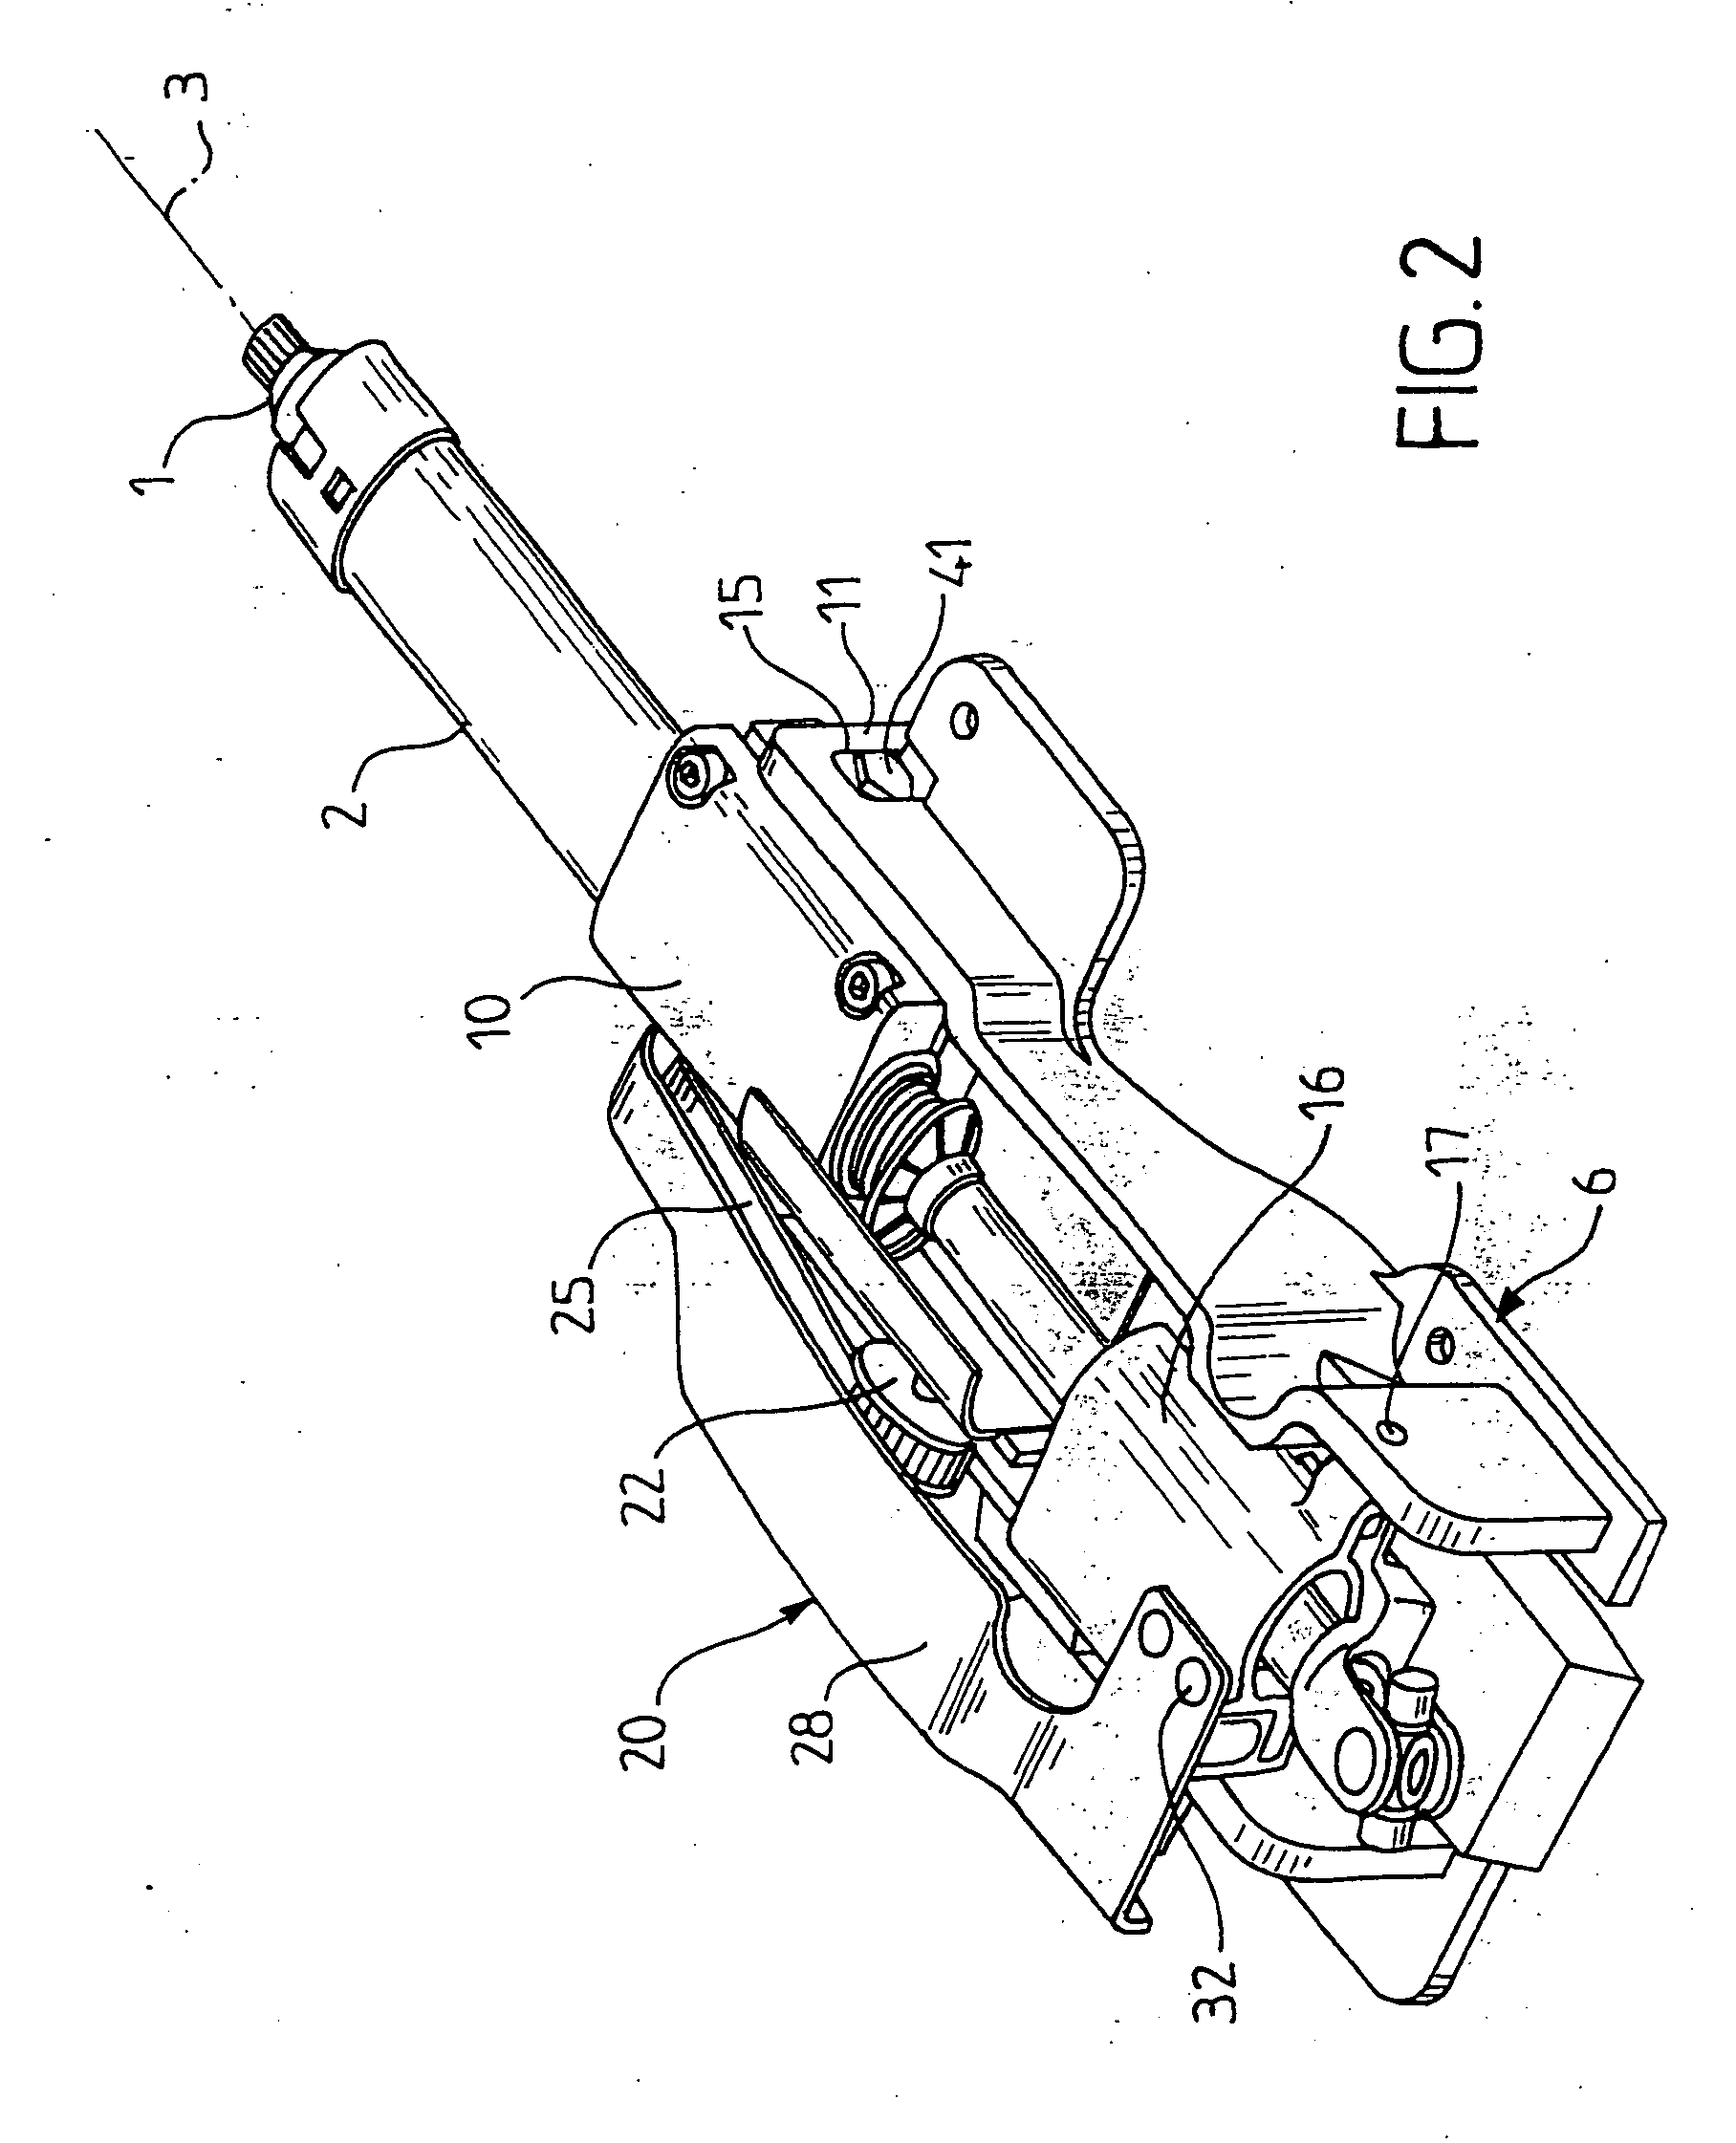 Adjustable steering column including electrically-operable locking means